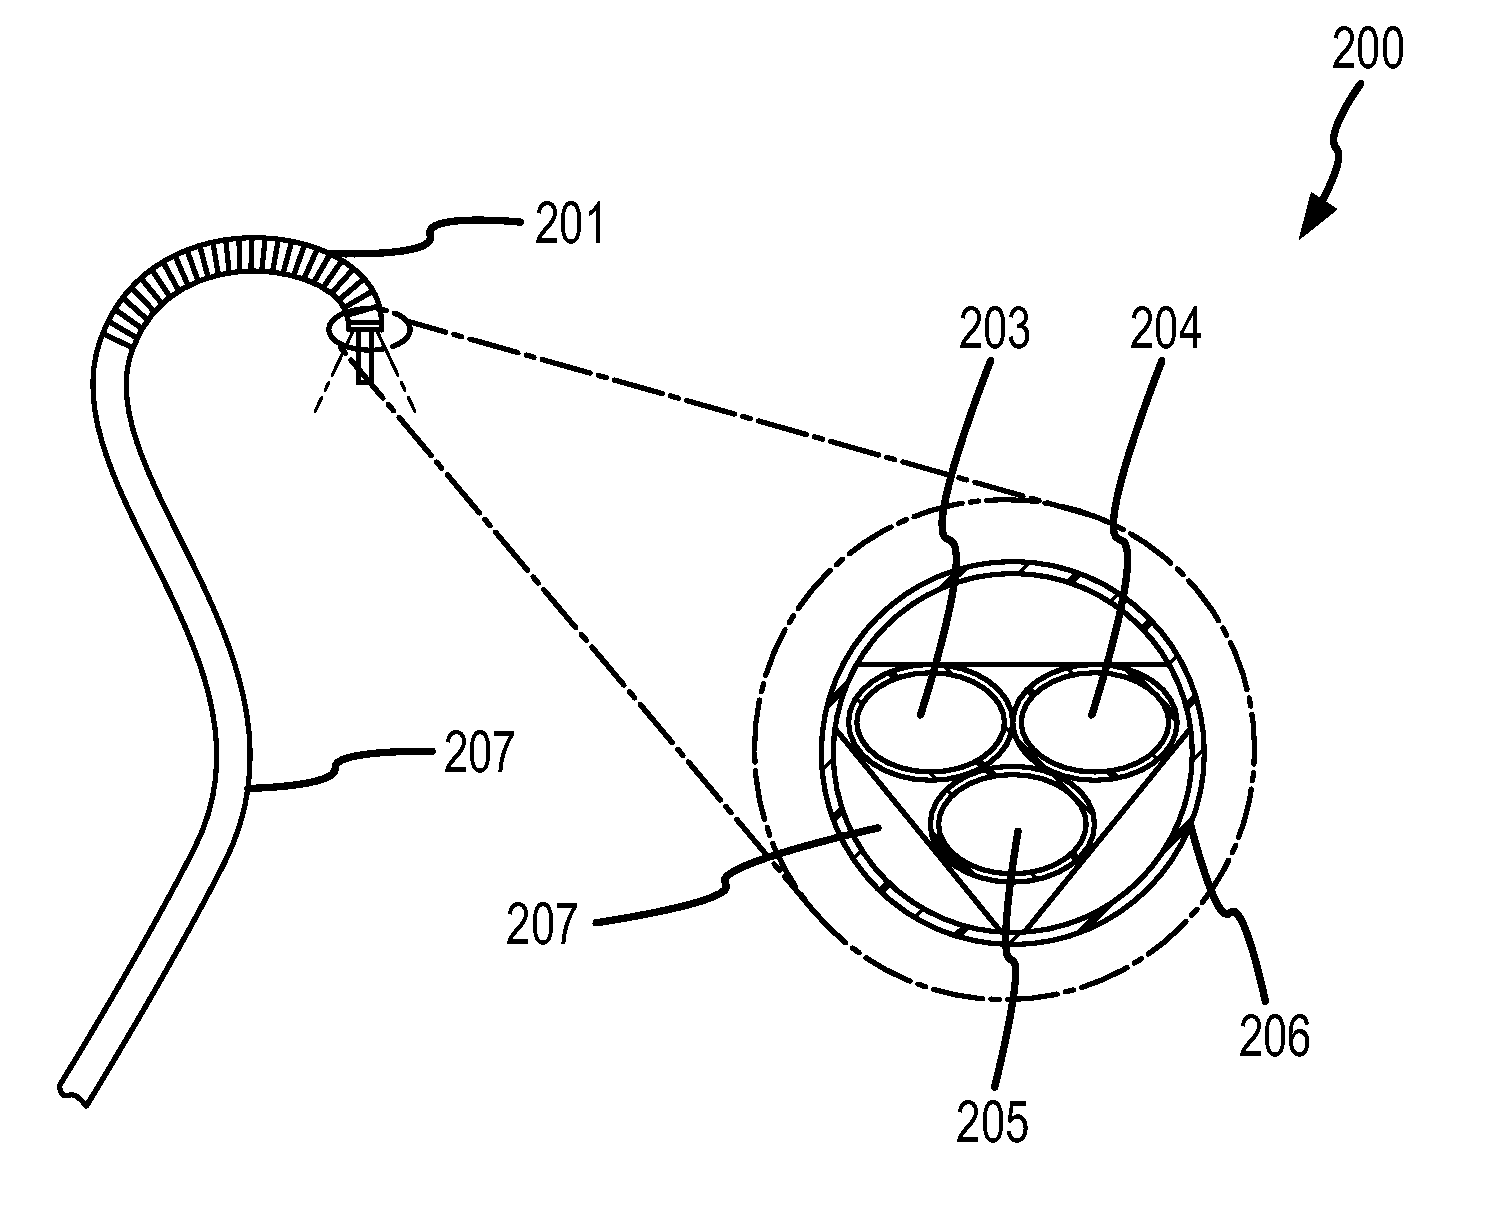 Endoscope apparatus, actuators, and methods therefor